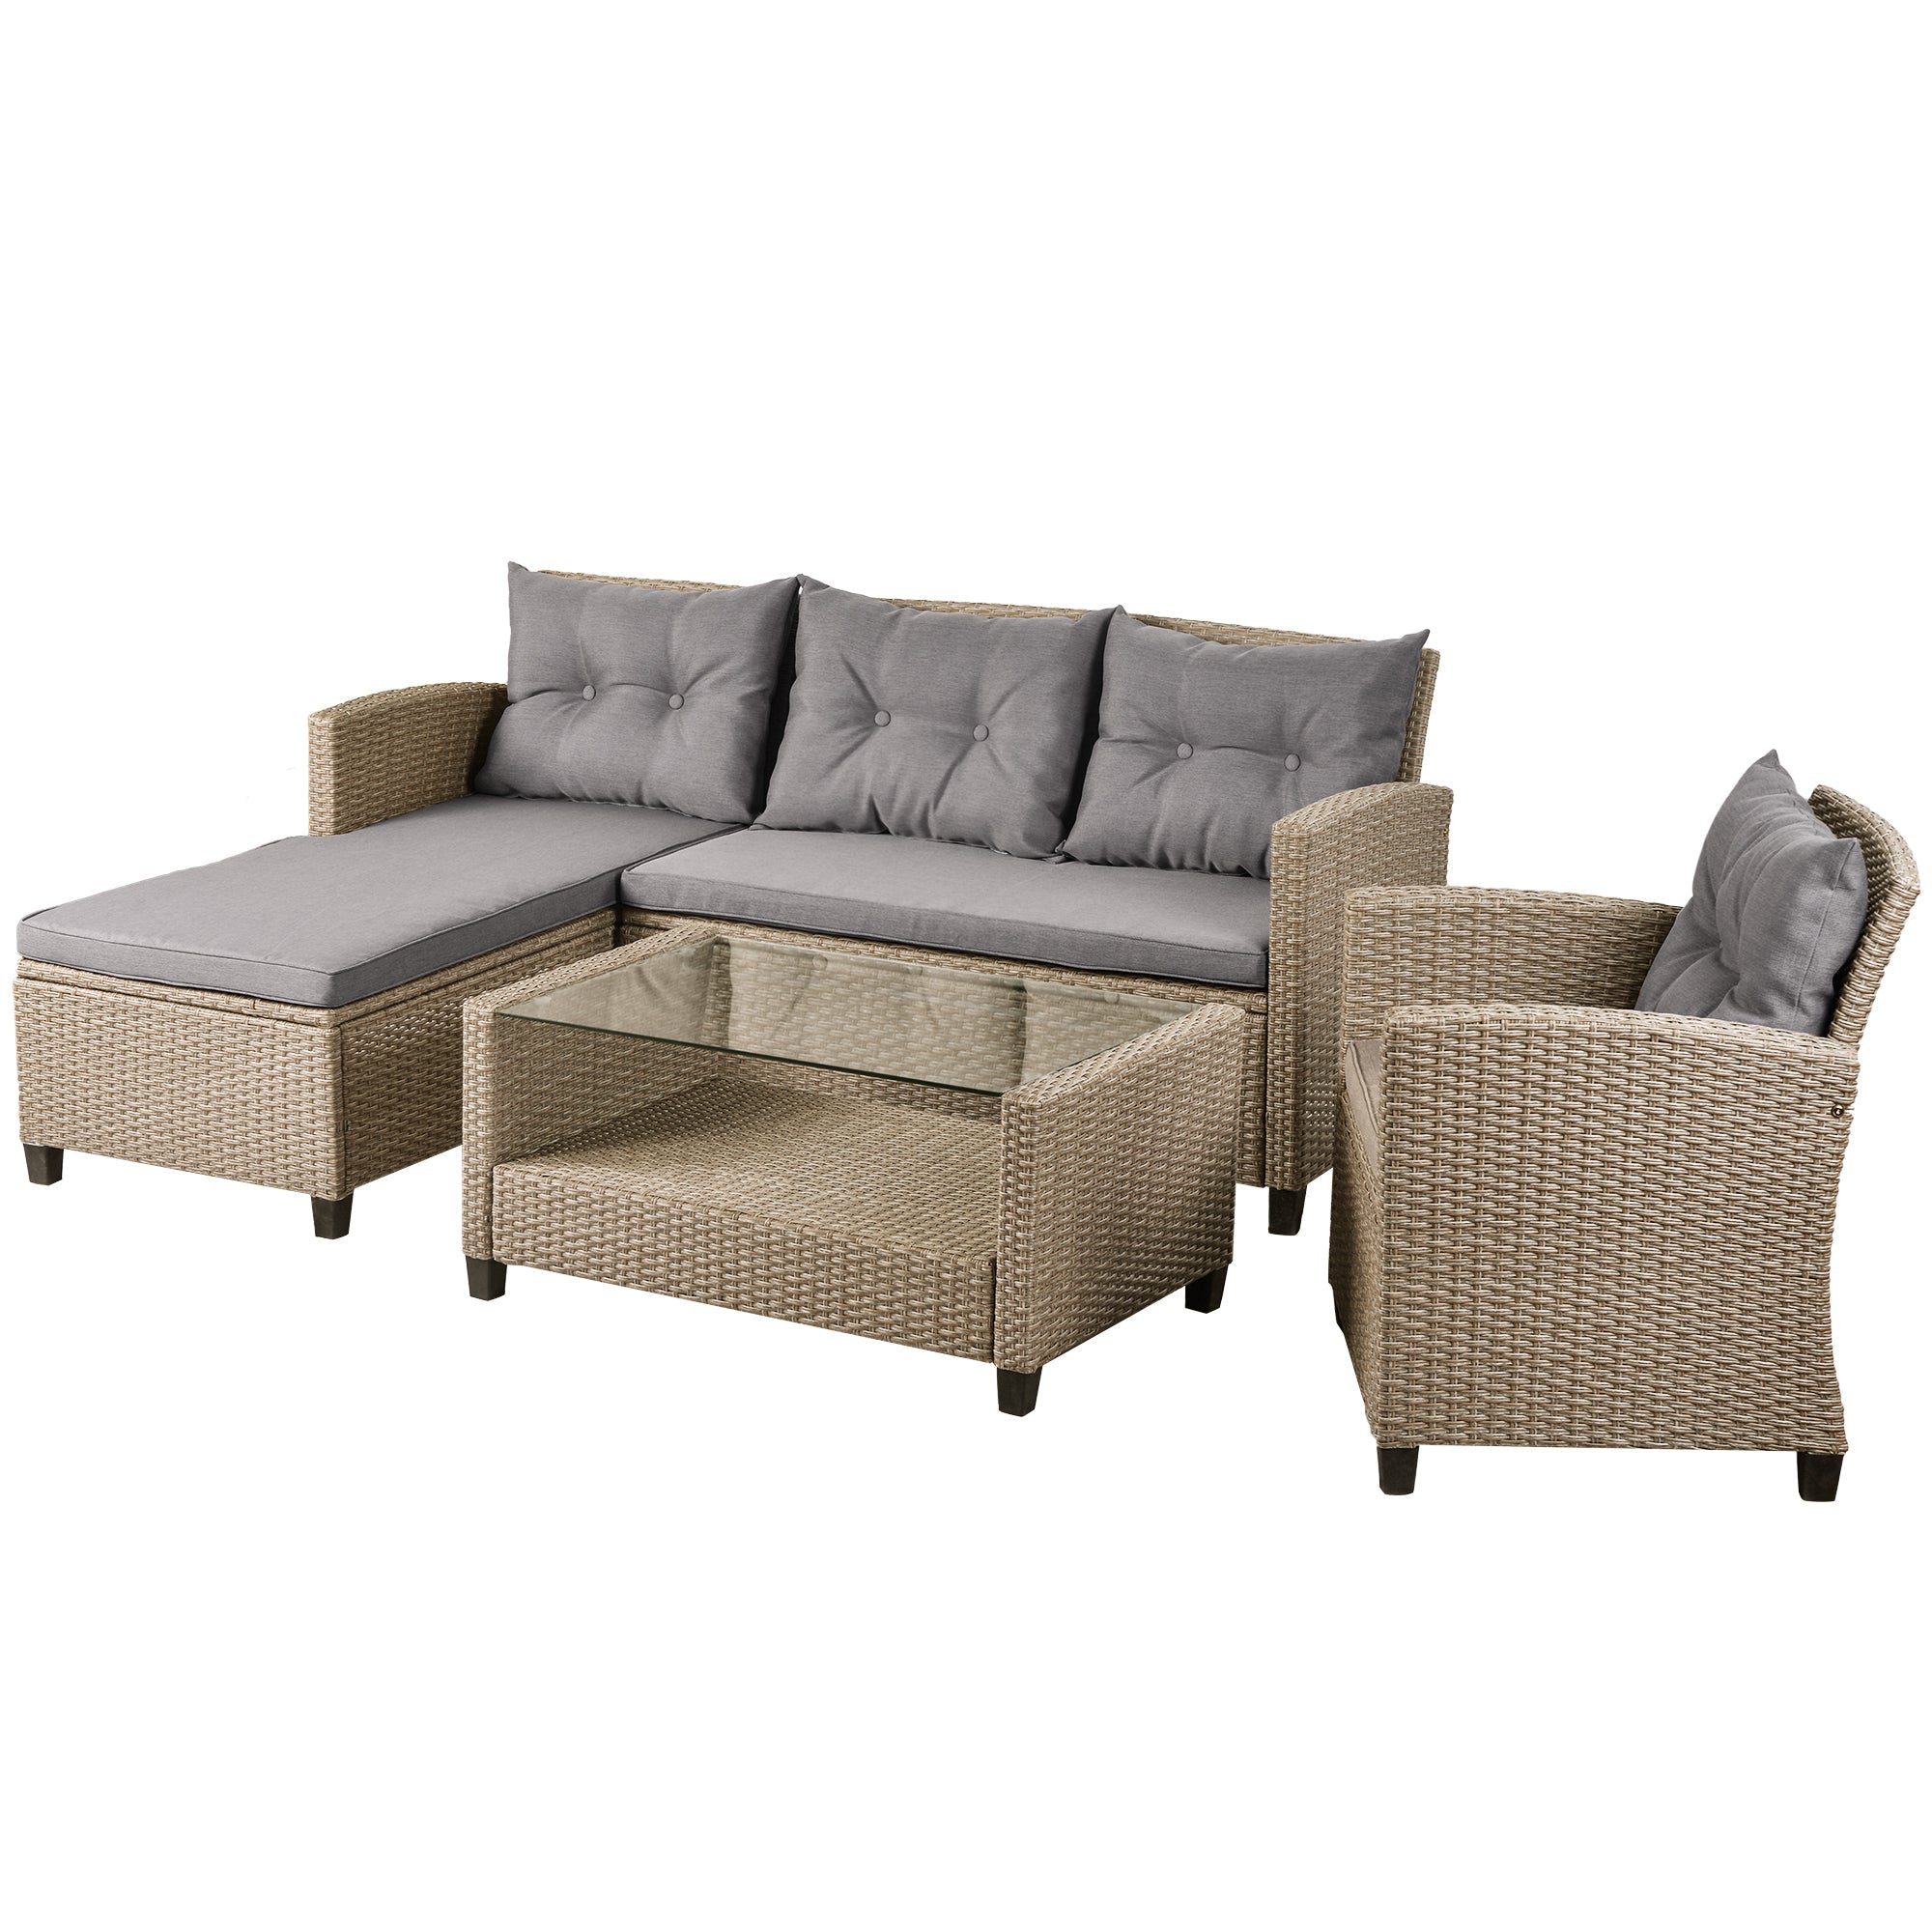 Brown 4-Piece Wicker Patio Sectional Set | Relax in Style-4 Piece Outdoor Sets-American Furniture Outlet